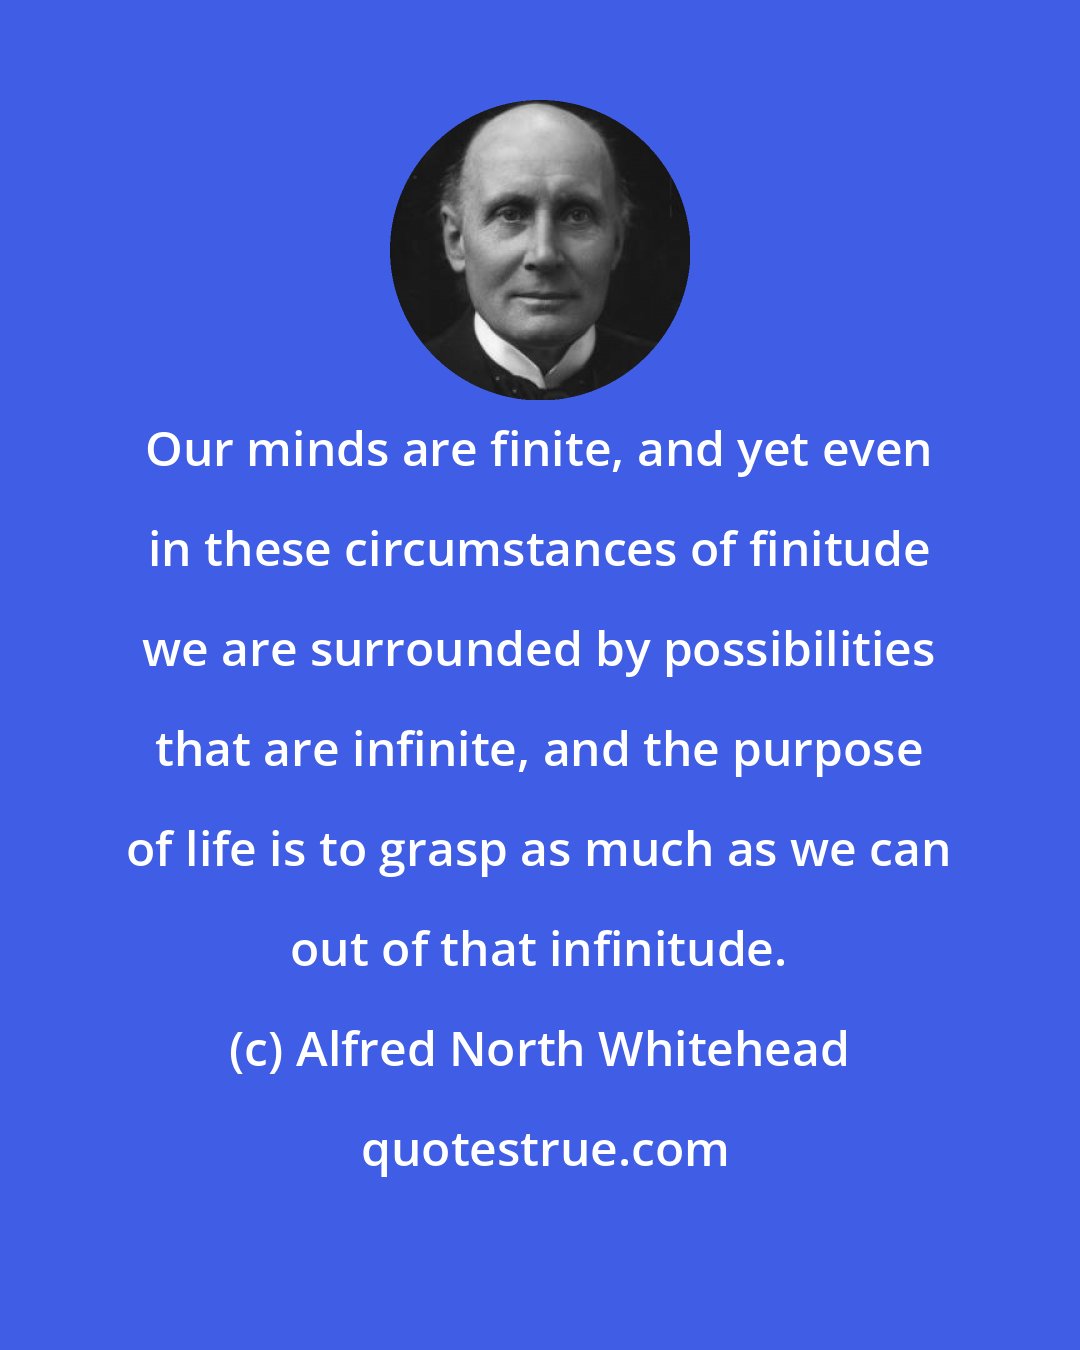 Alfred North Whitehead: Our minds are finite, and yet even in these circumstances of finitude we are surrounded by possibilities that are infinite, and the purpose of life is to grasp as much as we can out of that infinitude.